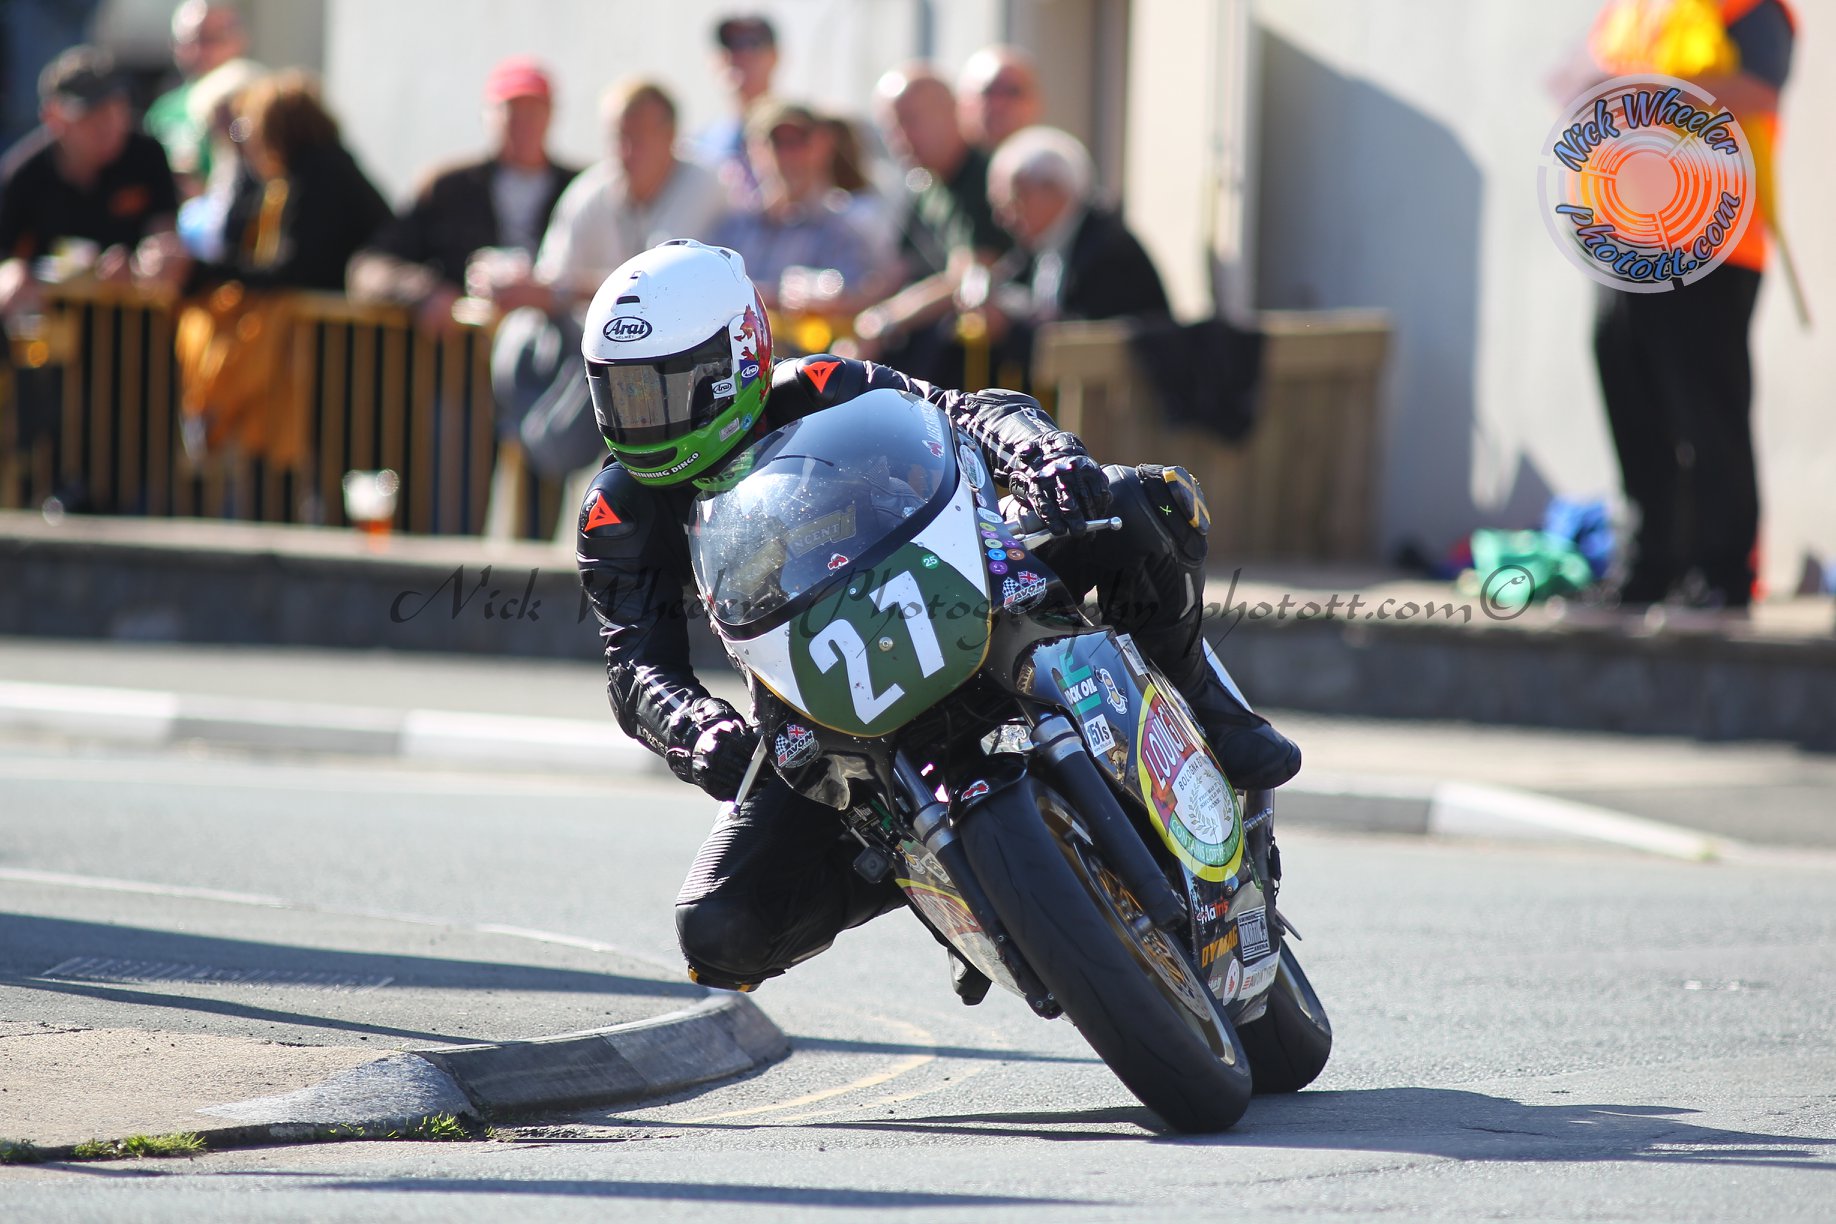 Yesteryear Racing Specialist Sinclair To Pilot Range Of Exotic Machinery At The 2019 Classic TT Races